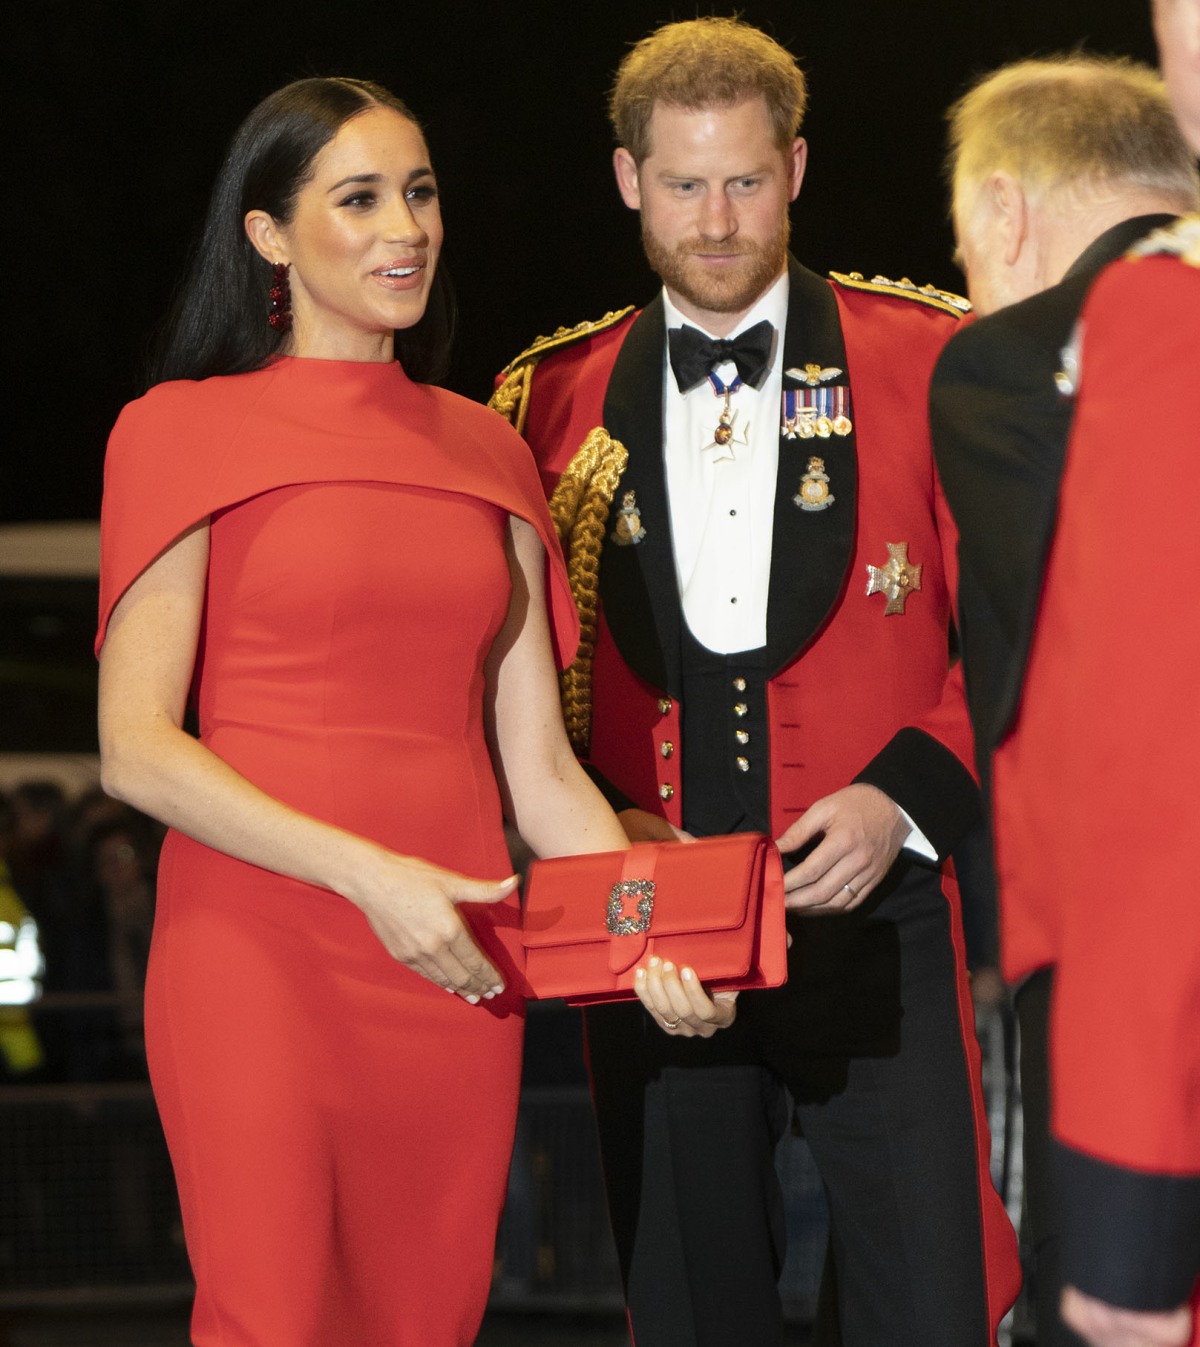 The Duke and Duchess of Sussex arrive at the Albert Hall for the  Mountbatten Festival of Music this evening 7 - March - 2020